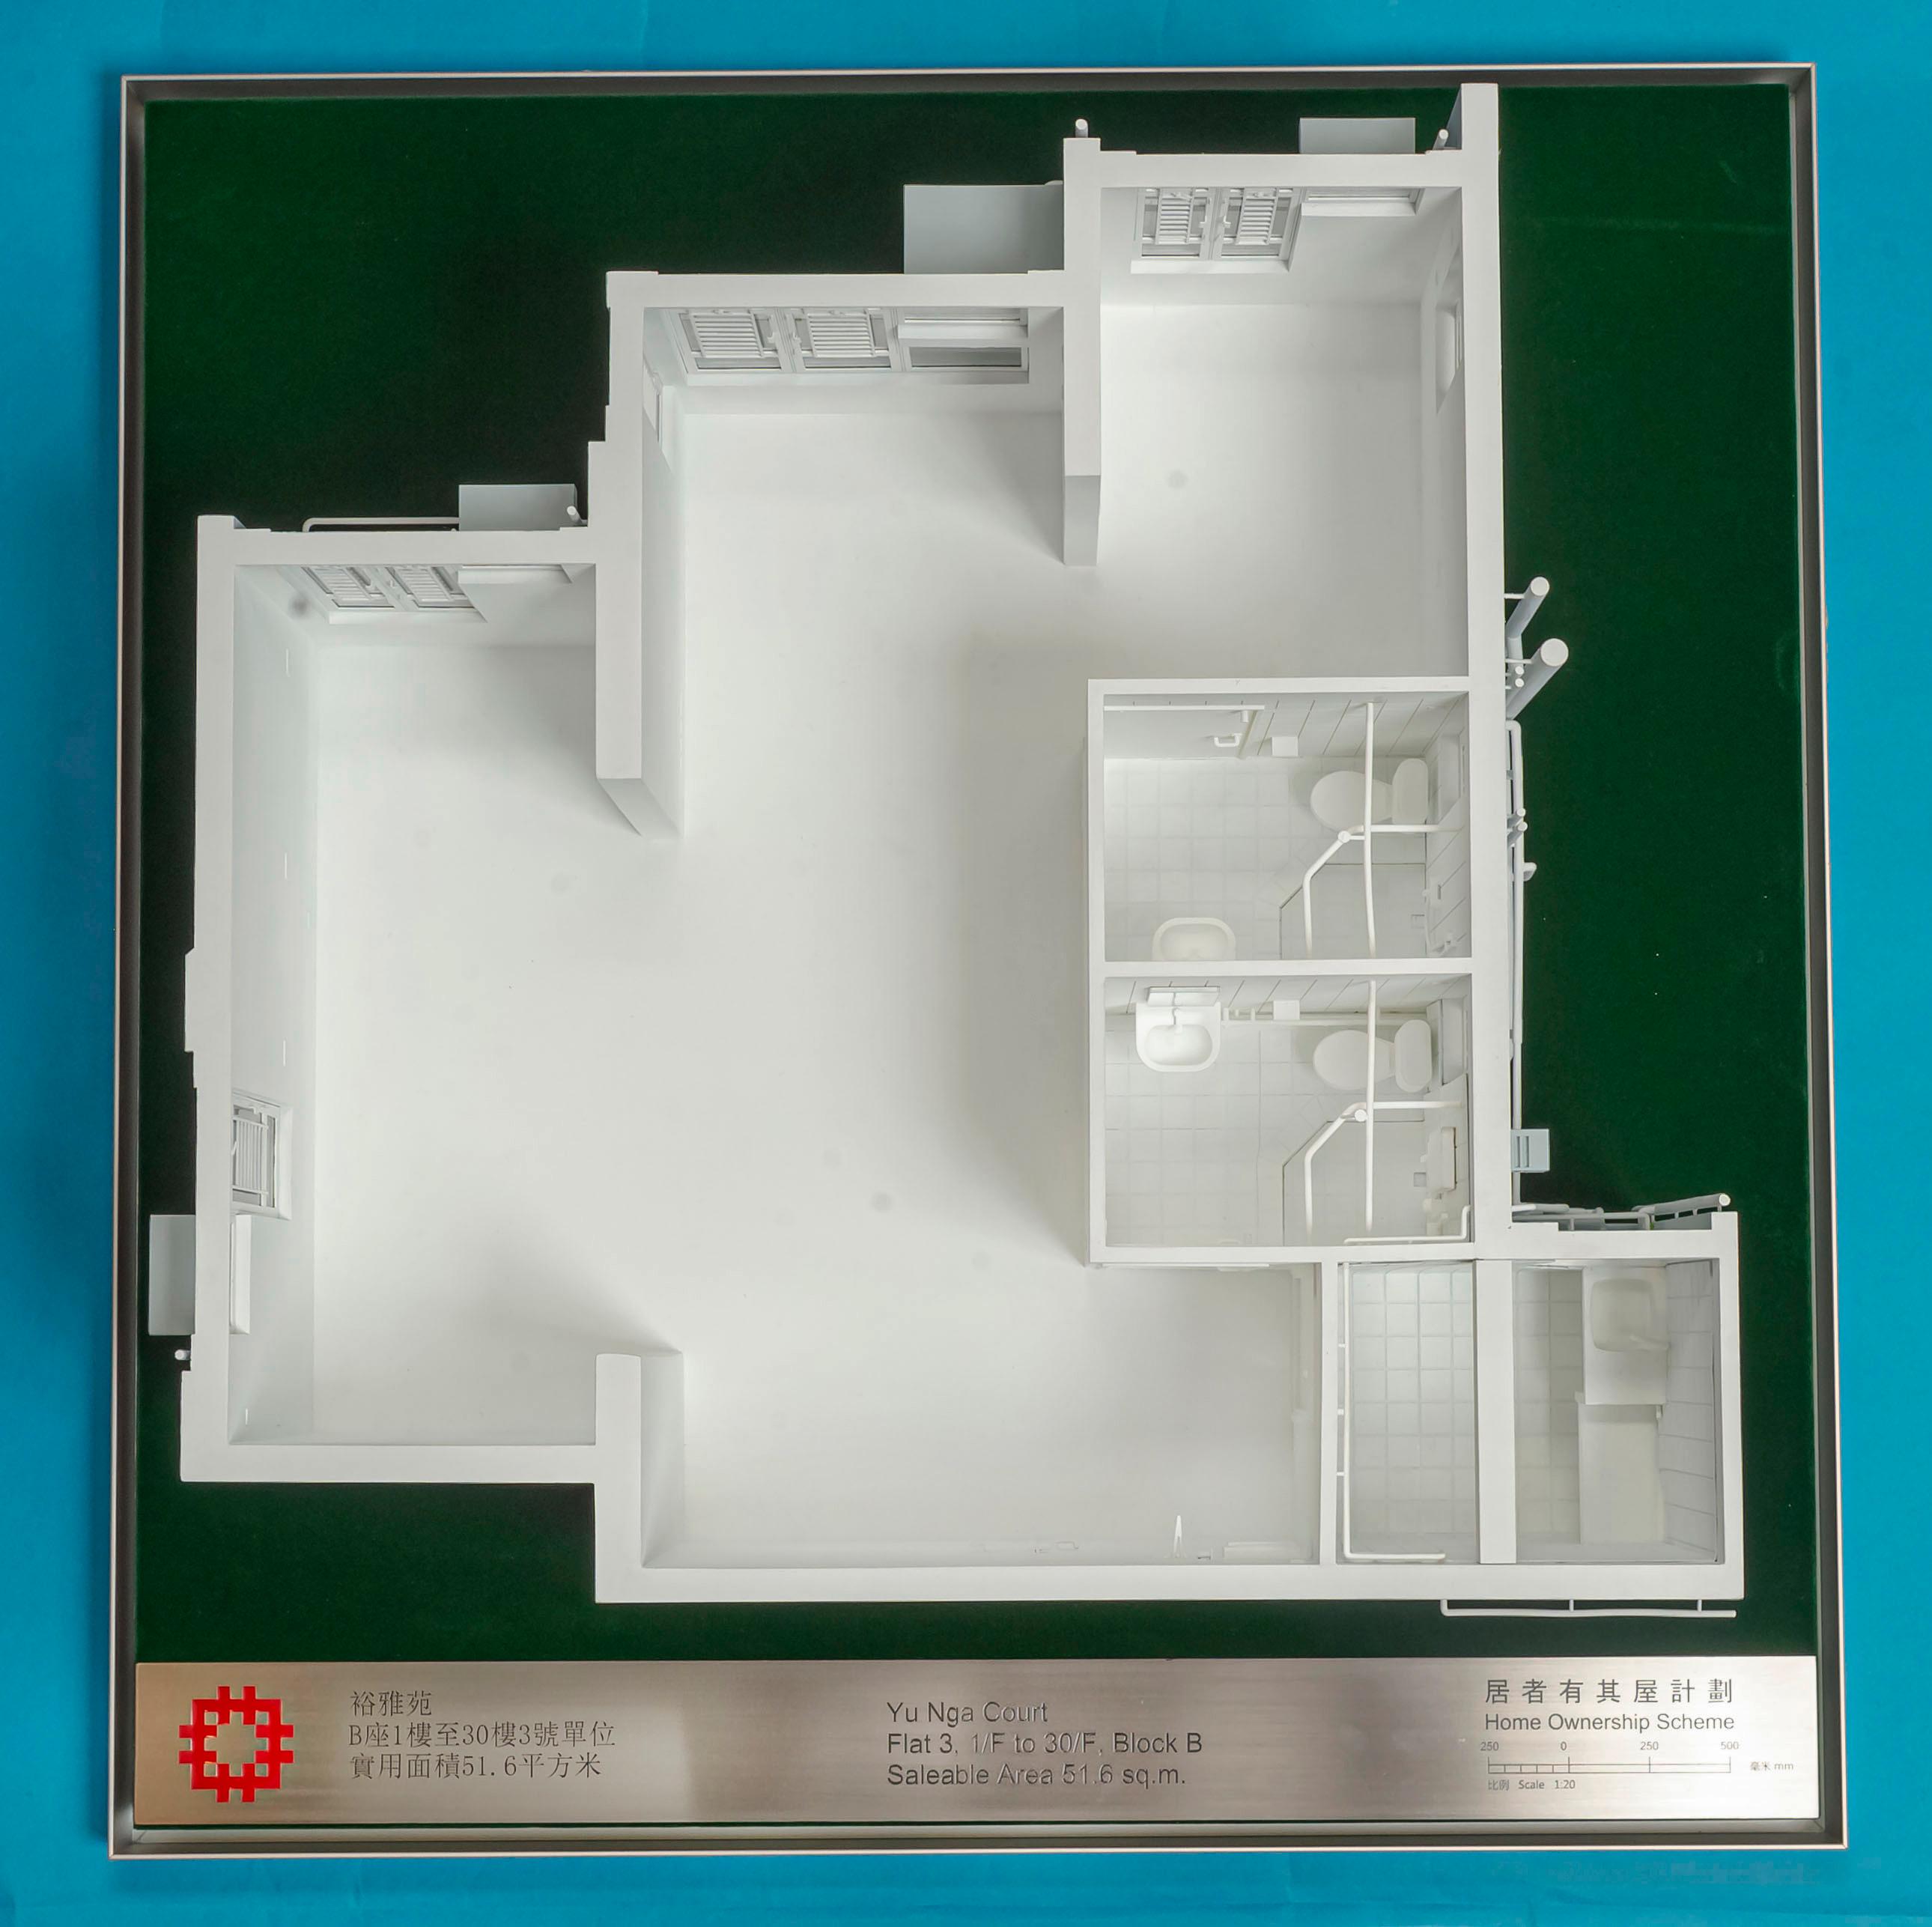 Applications for purchase under Sale of Home Ownership Scheme Flats 2022 will start on February 25. Photo shows a model of Flat 3, 1/F to 30/F, Block B, Yu Nga Court, which is a development project under the scheme.